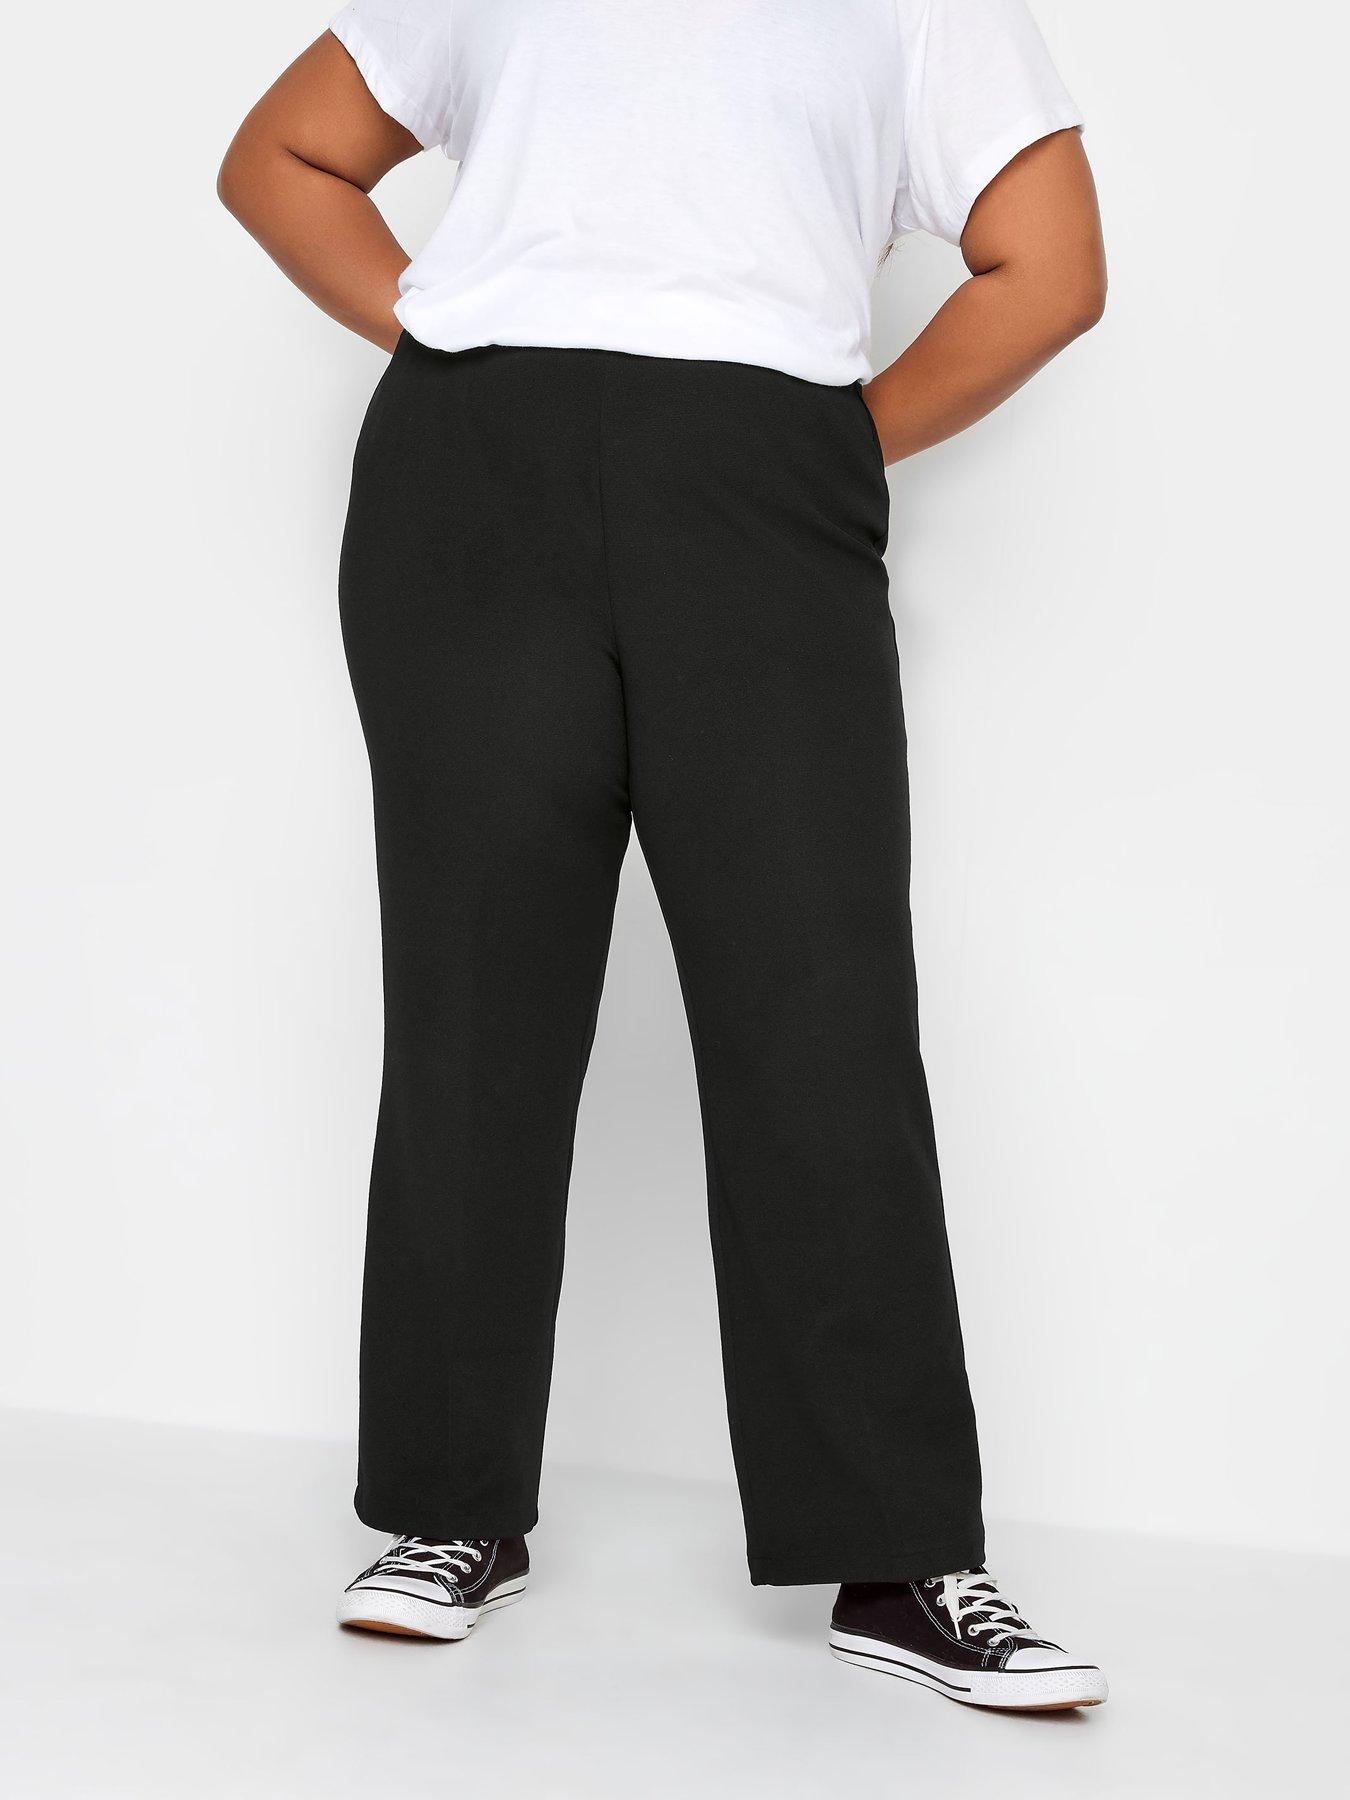 Black Stretch Formal Bootcut Trousers | Women | George at ASDA